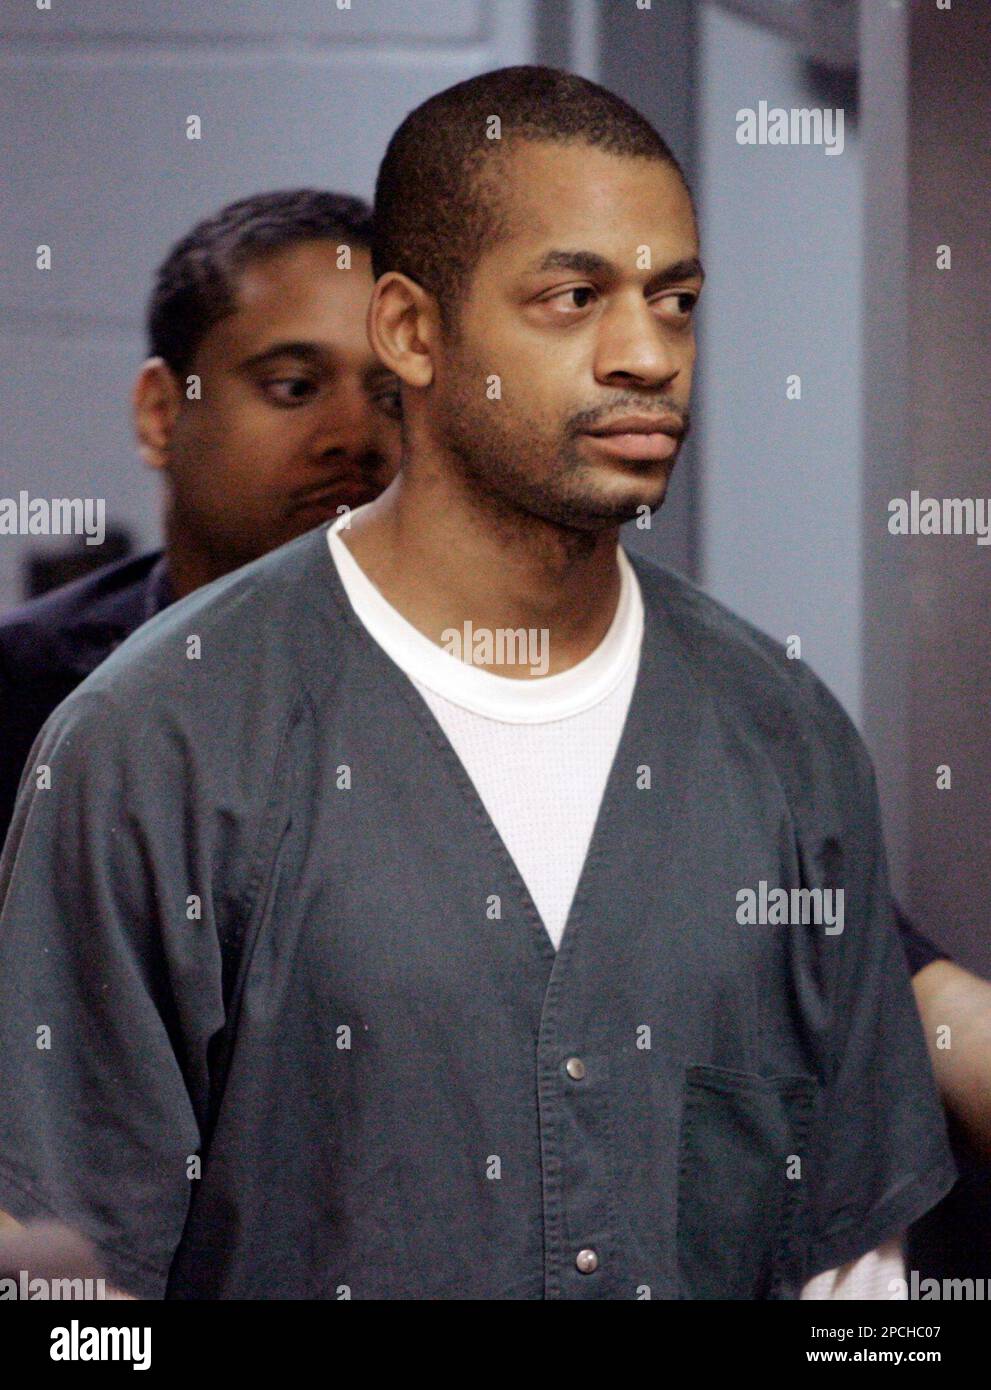 Shelly Andre Brooks, 37, is shown in Detroit Tuesday, Sept. 19, 2006. Described by authorities as a serial killer charged with killing seven prostitutes over the past five years, Brooks was bound over for trial Tuesday in three of the slayings. Brooks was charged in August with seven counts each of premeditated murder and felony murder in the deaths between August 2001 and June of this year. He has pleaded not guilty. AP Photo/Carlos Osorio) Stock Photo